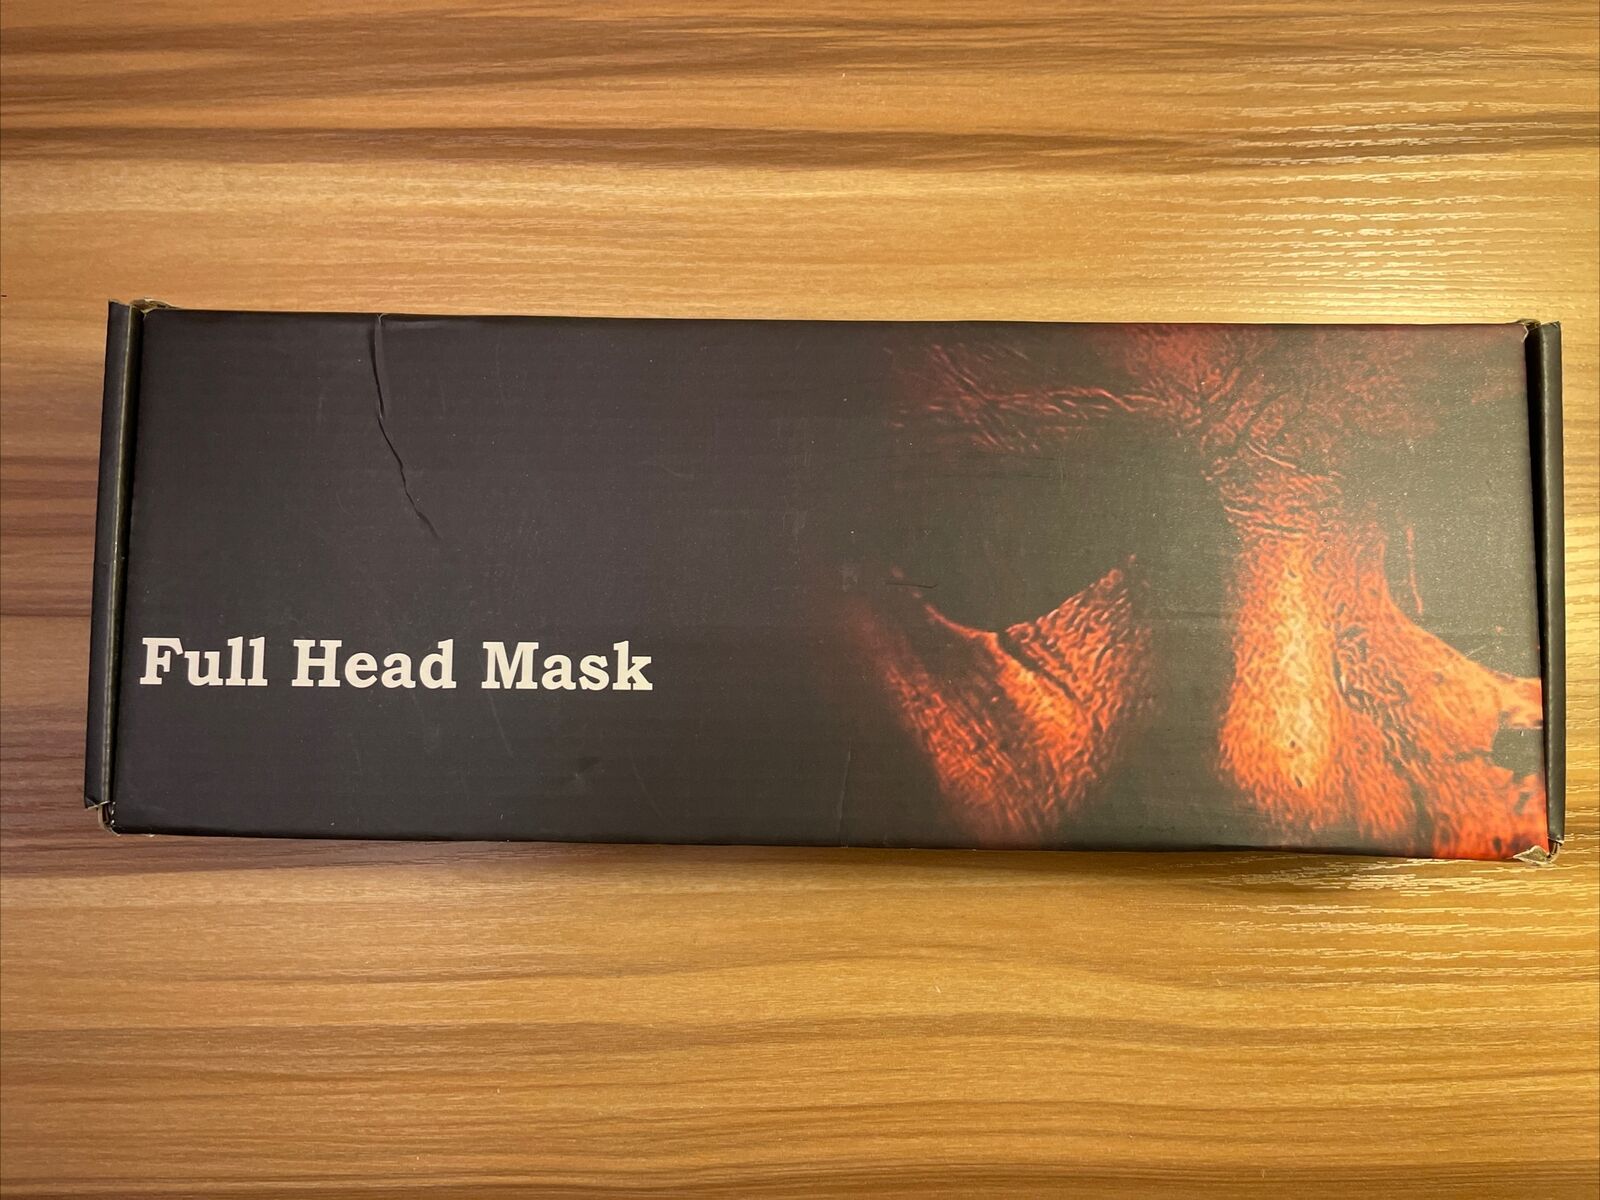 2022 Michael Myers Halloween Ends Mask GKTOP New - Unopened